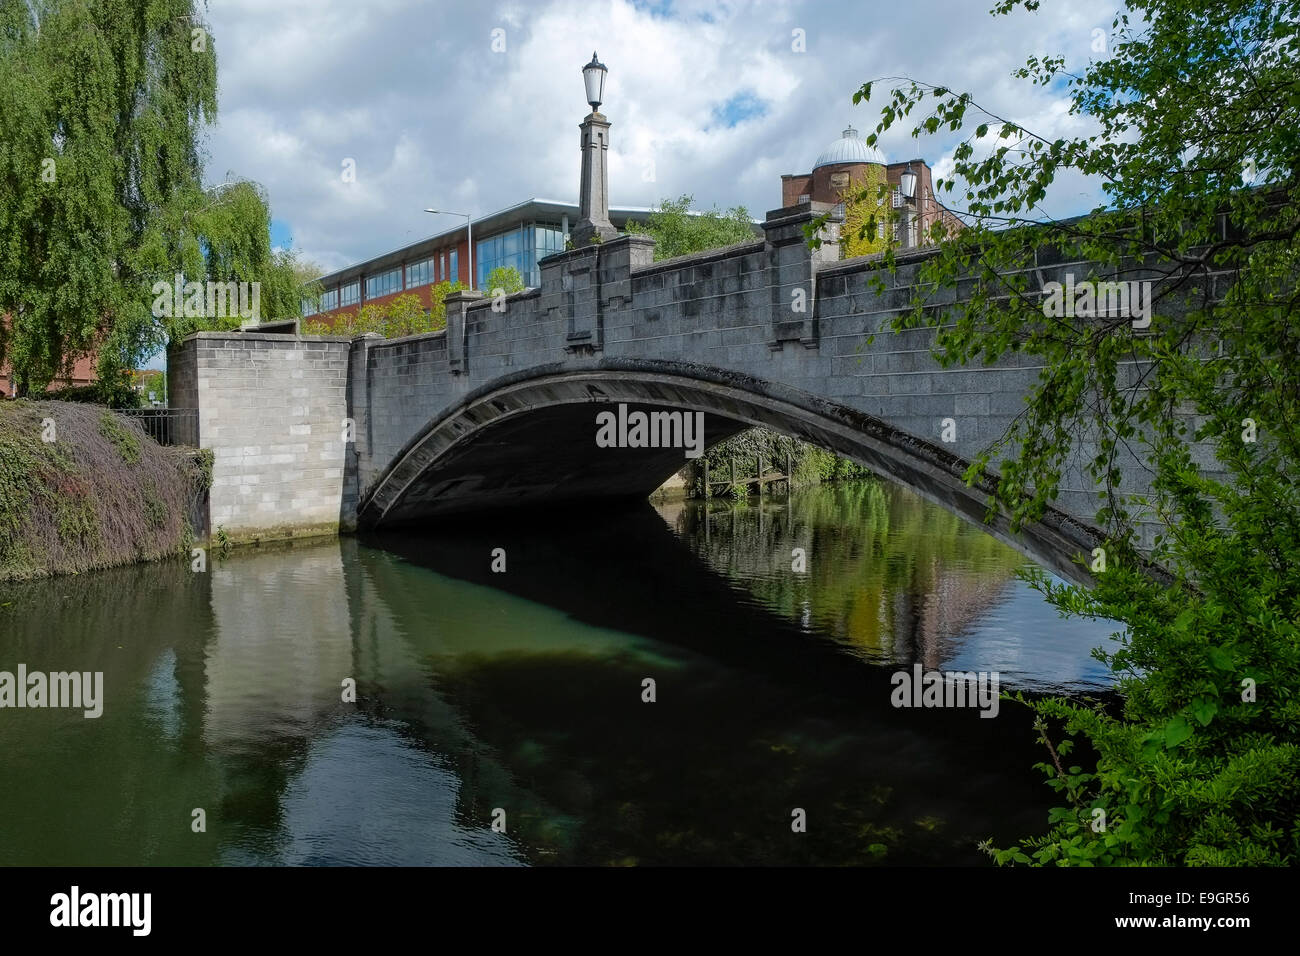 Whitefriars Bridge in Norwich, built in the 1920s by AE Collins. Stock Photo